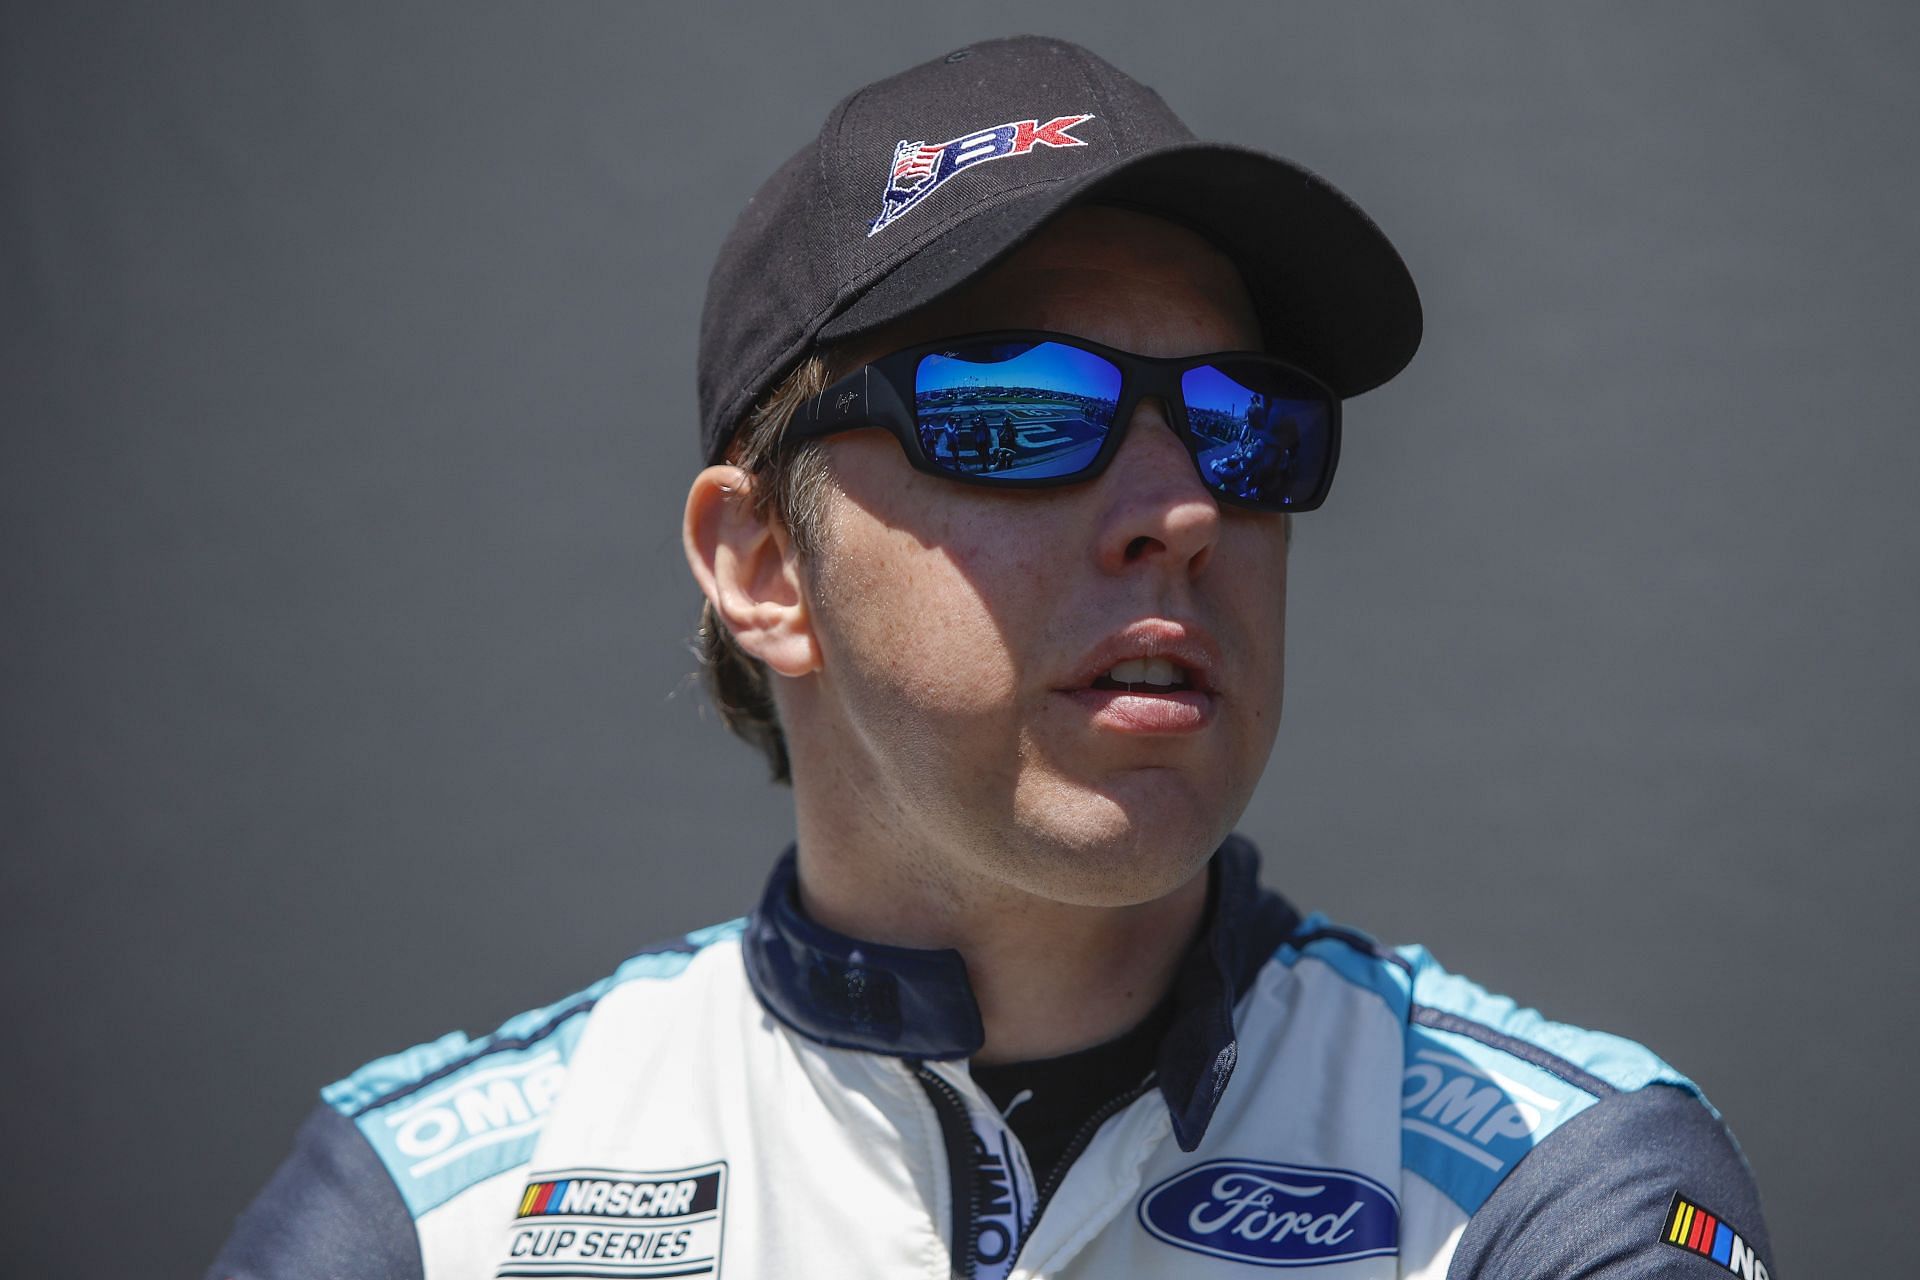 Brad Keselowski waits backstage during driver intros before the NASCAR Cup Series Folds of Honor QuikTrip 500 at Atlanta Motor Speedway. (Photo by Sean Gardner/Getty Images)